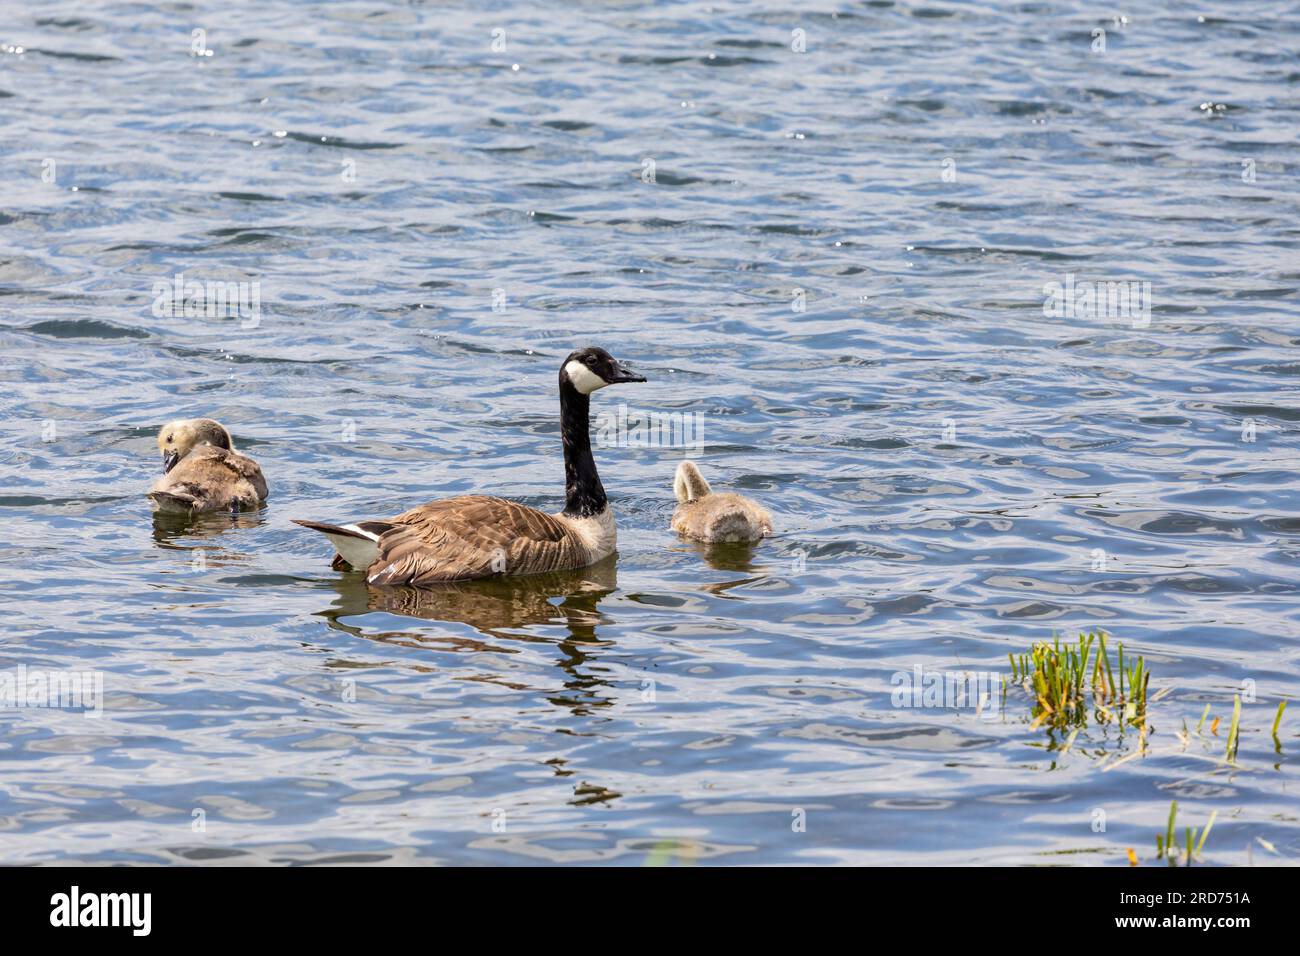 Canada goose, Branta canadensis  swimming with two goslings in a lake, Dorset, England, UK Stock Photo